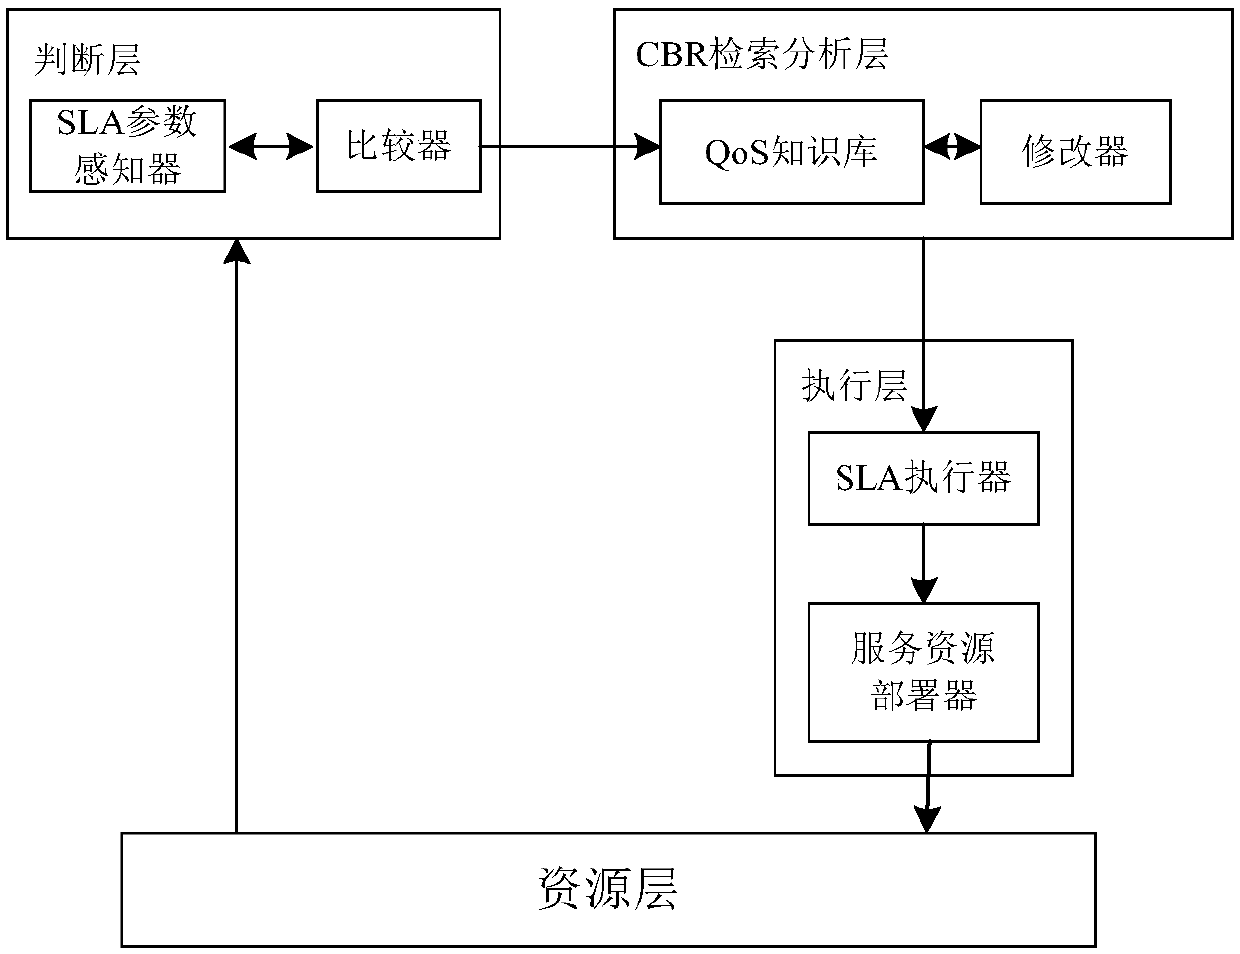 SLA system framework and adjustment method for automatic feedback adjustment in cloud computing environment